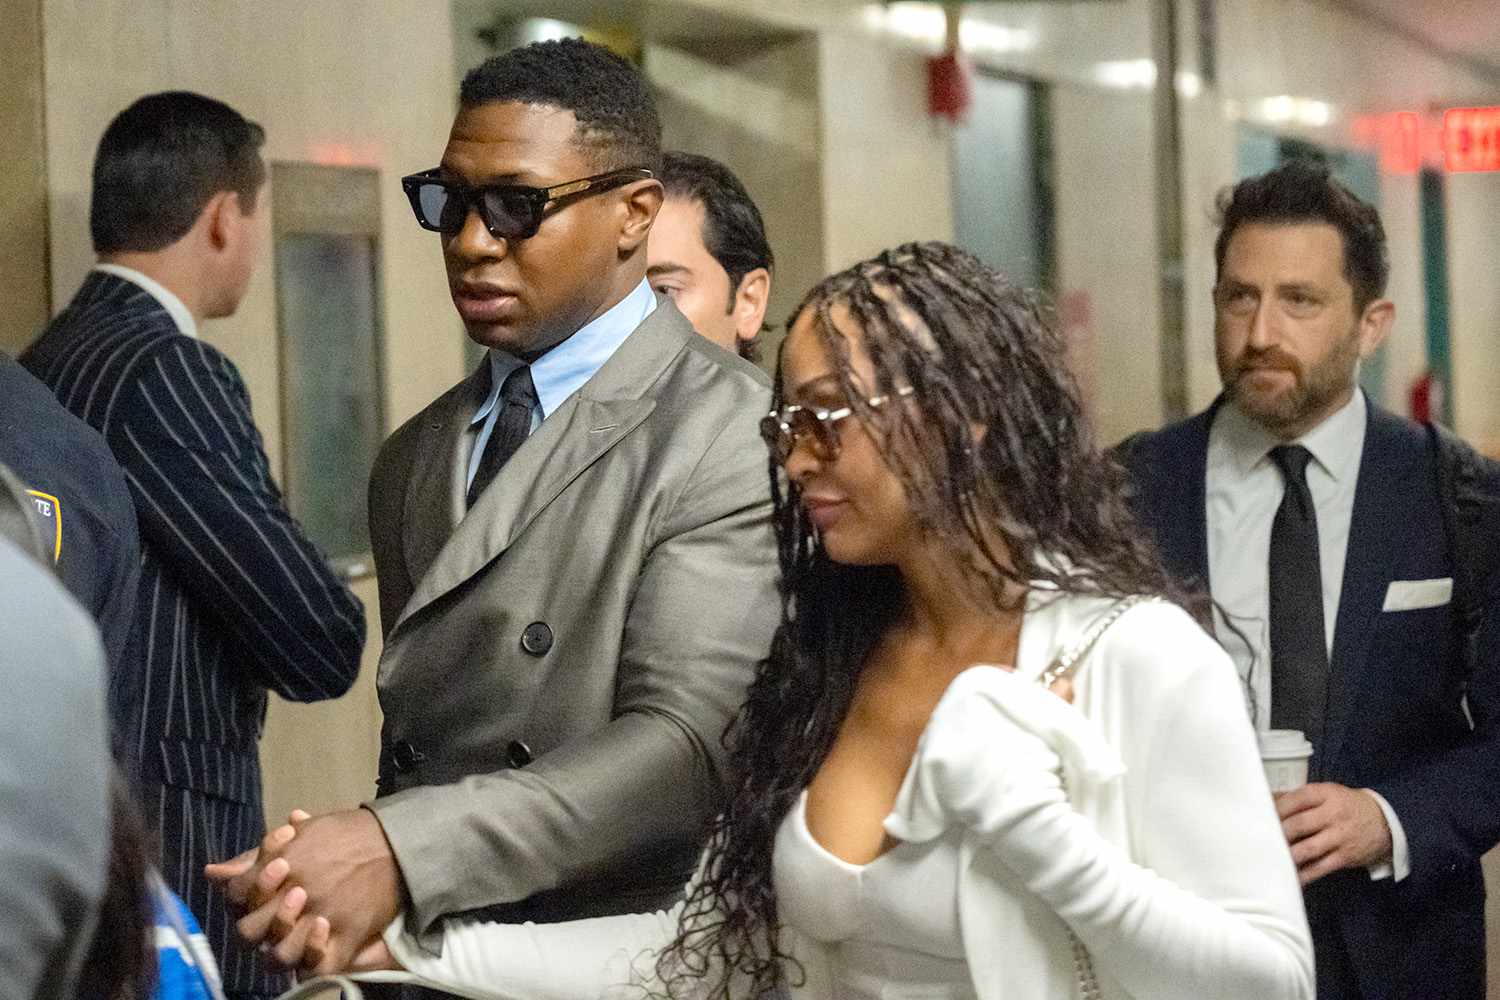 Jonathan Majors And Meagan Good Spotted Cuddling In NYC Ahead Of Trial